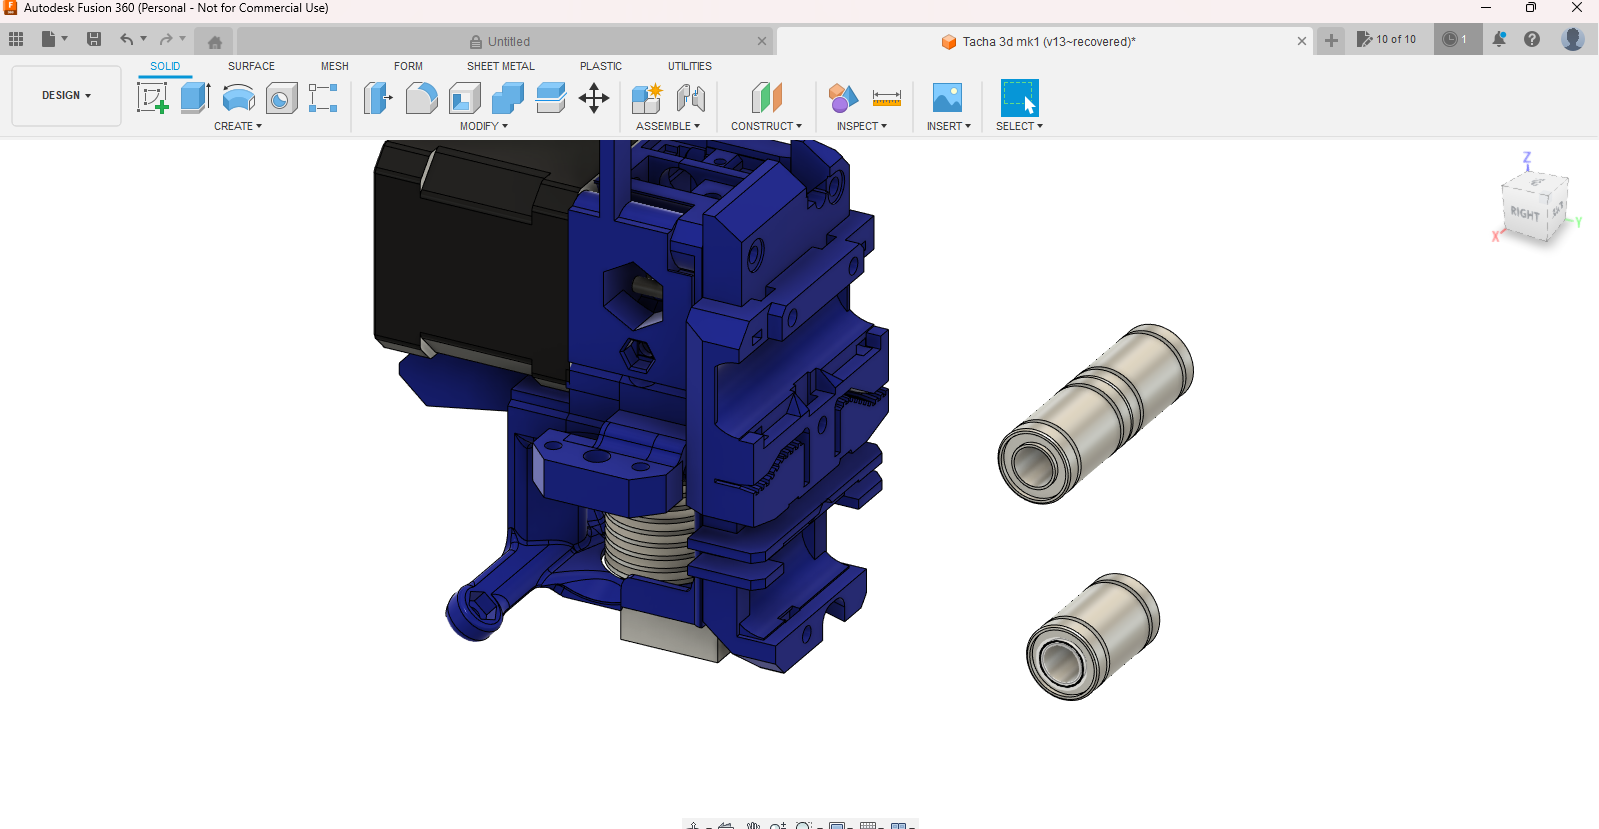 Autodesk Fusion 360 (Personal - Not for Commercial Use) 6_29_2023 10_08_32 PM.png